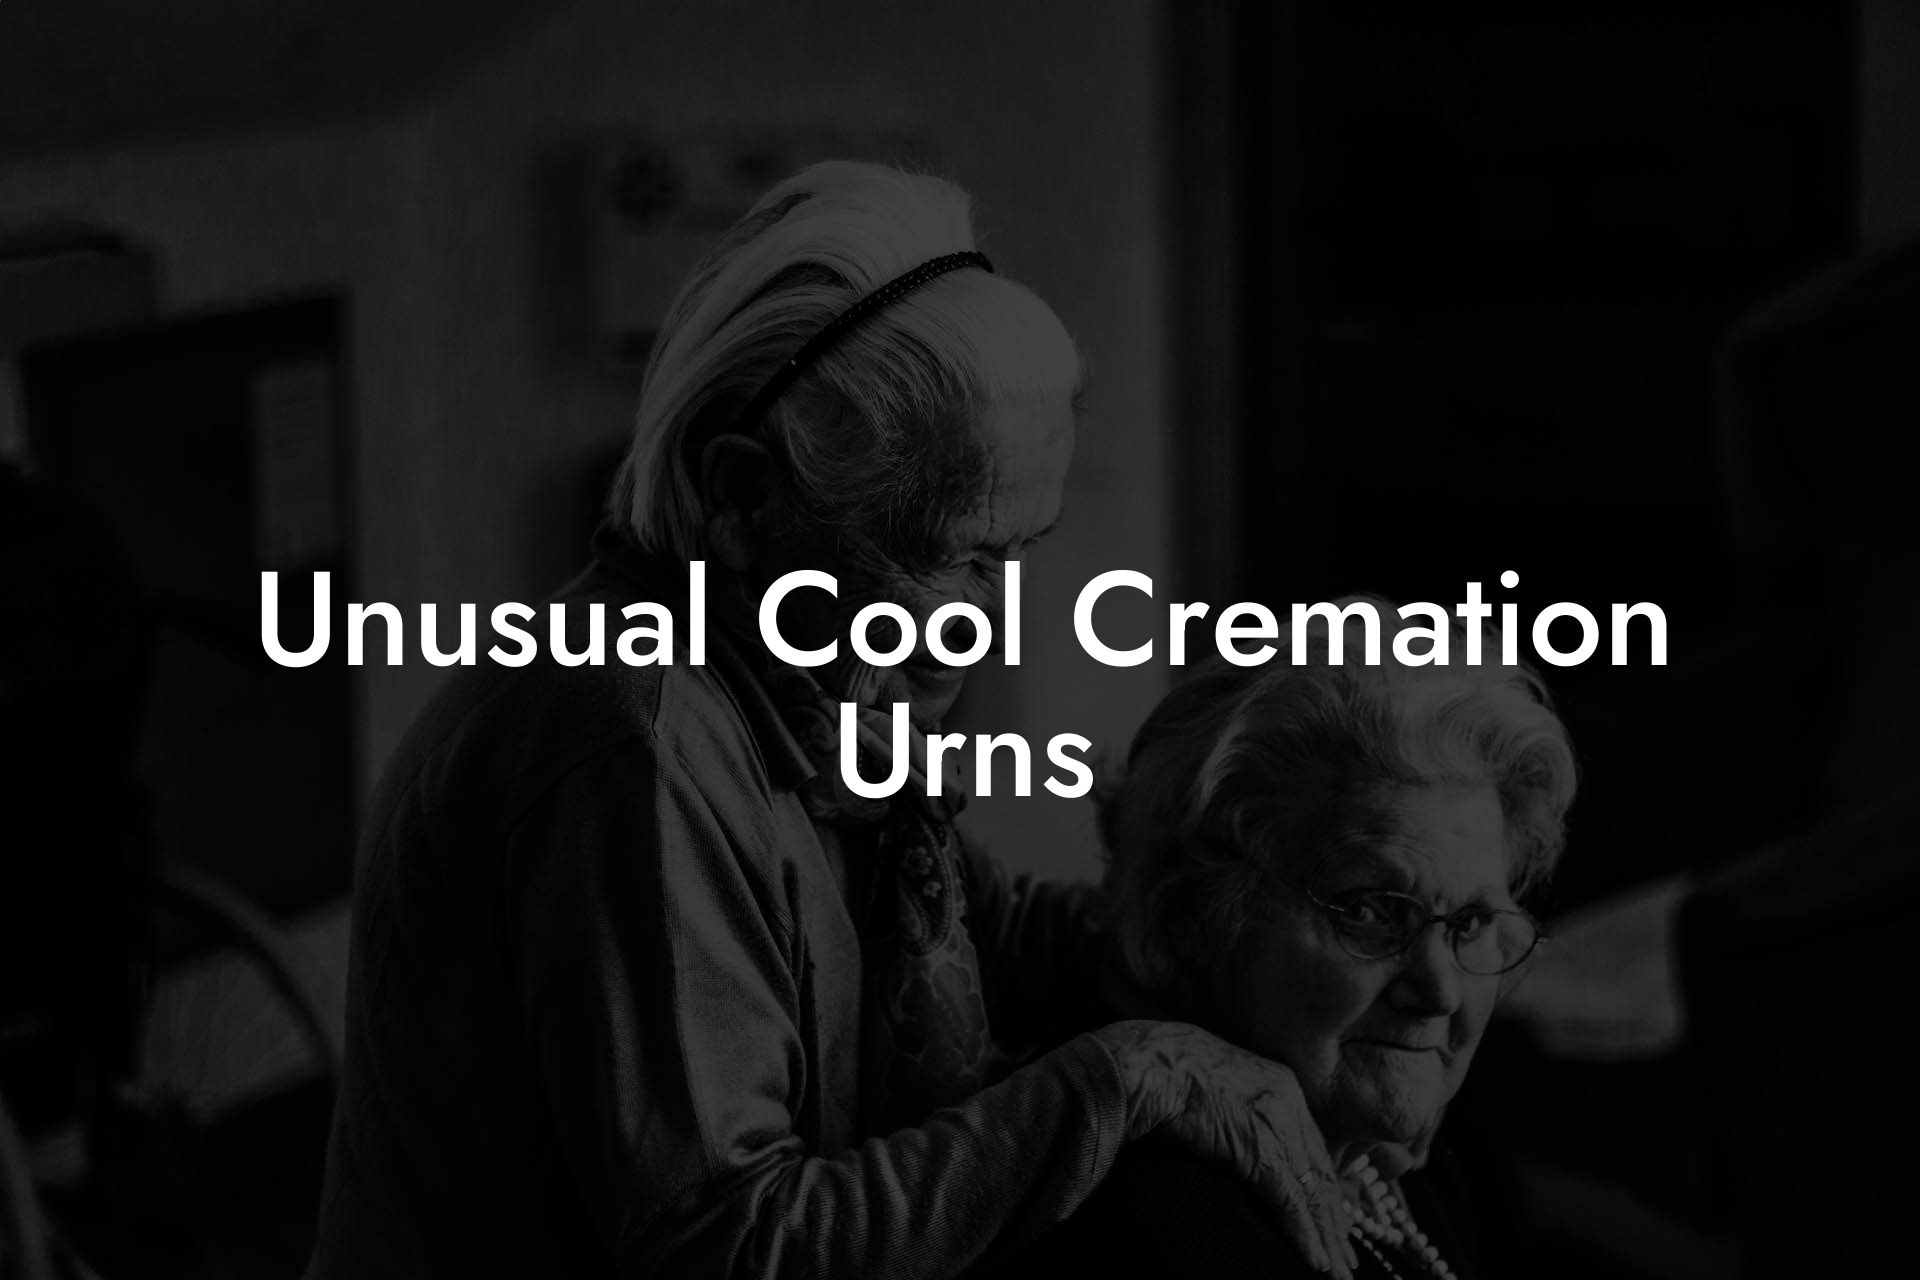 Unusual Cool Cremation Urns